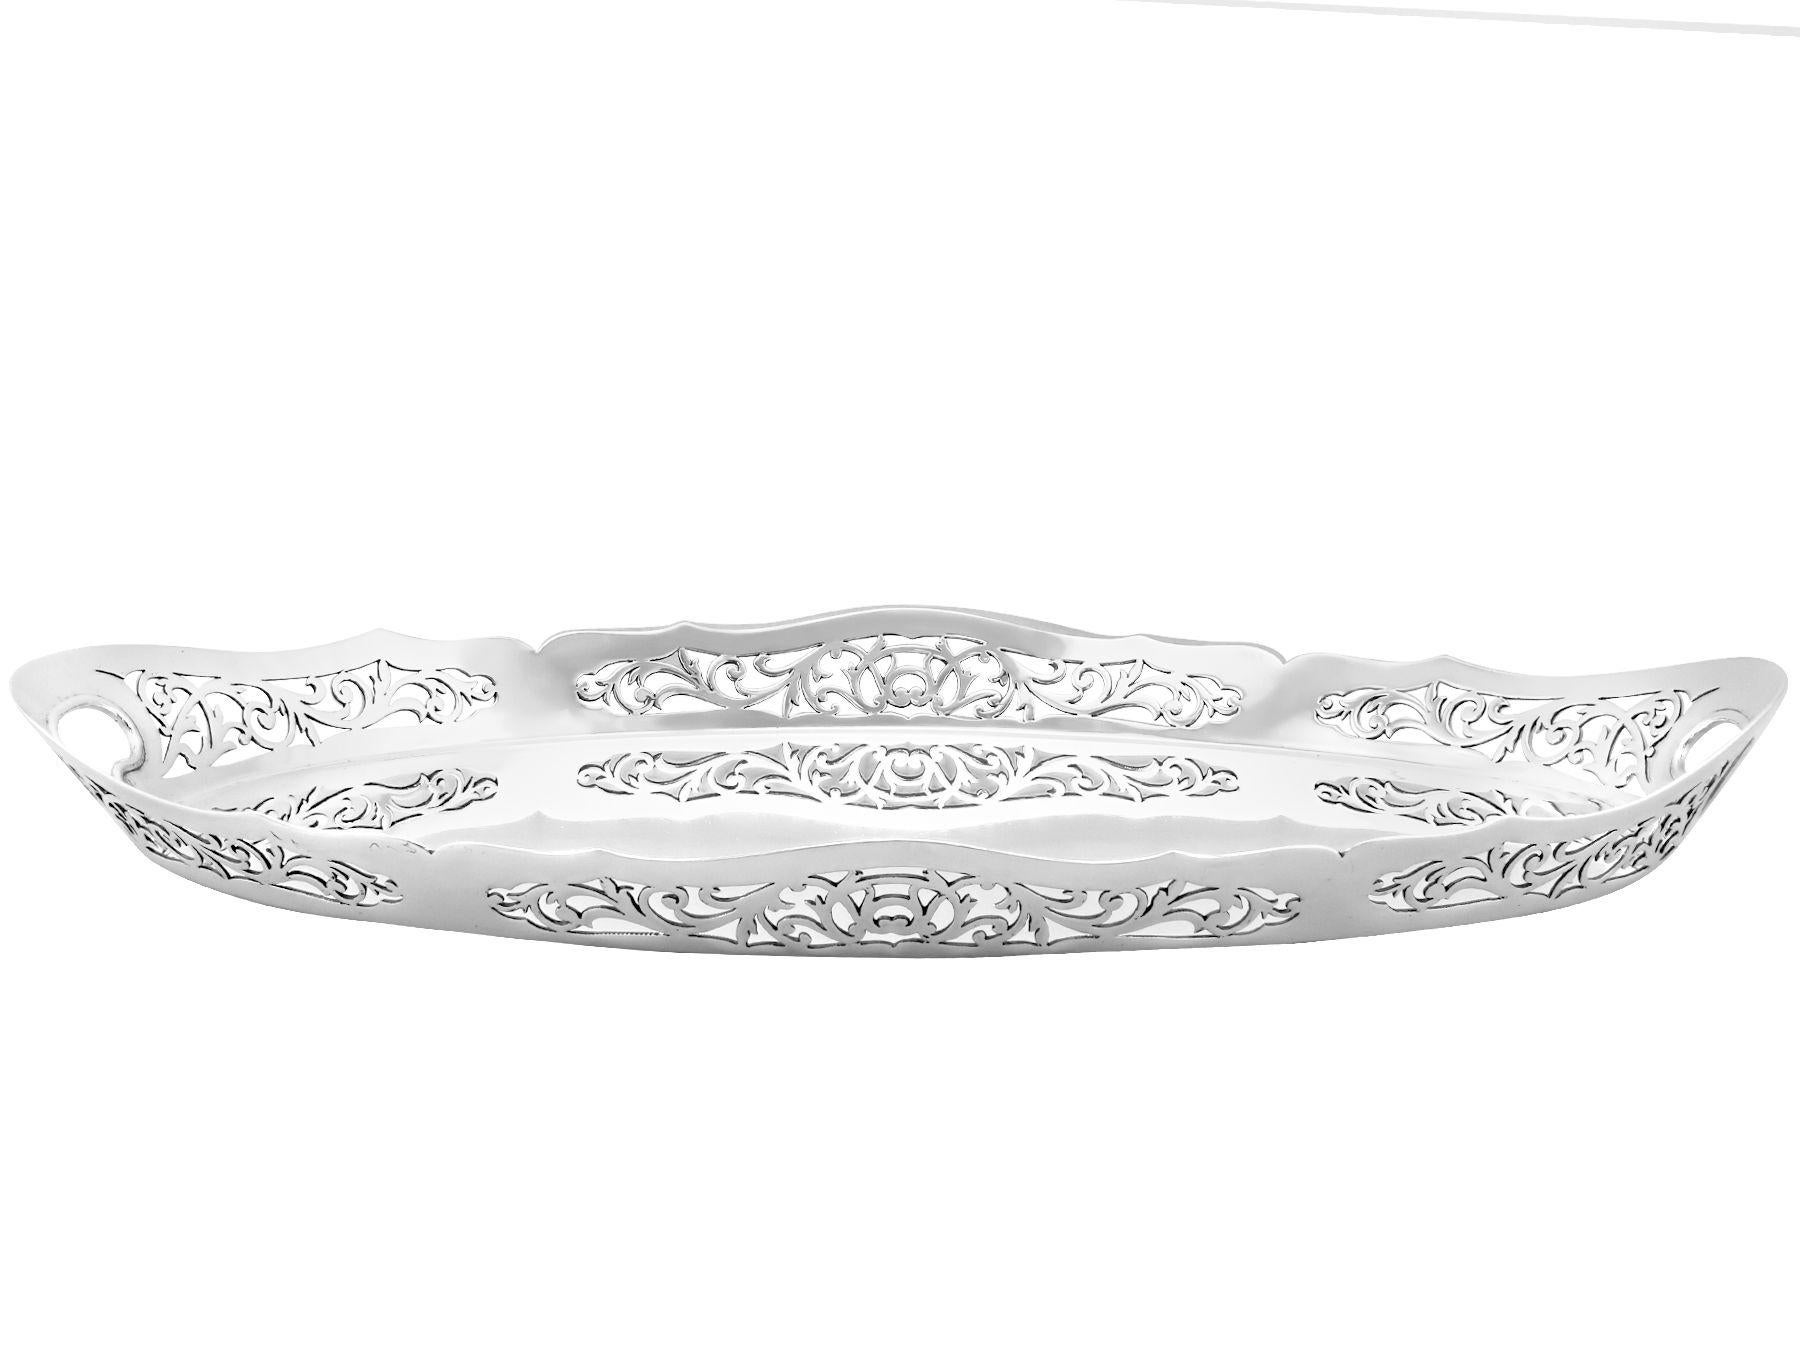 An exceptional, fine and impressive antique George V English sterling silver gallery tray; an addition to our dining silverware collection

This exceptional antique George V sterling silver gallery tray has a plain oval form.

The surface of